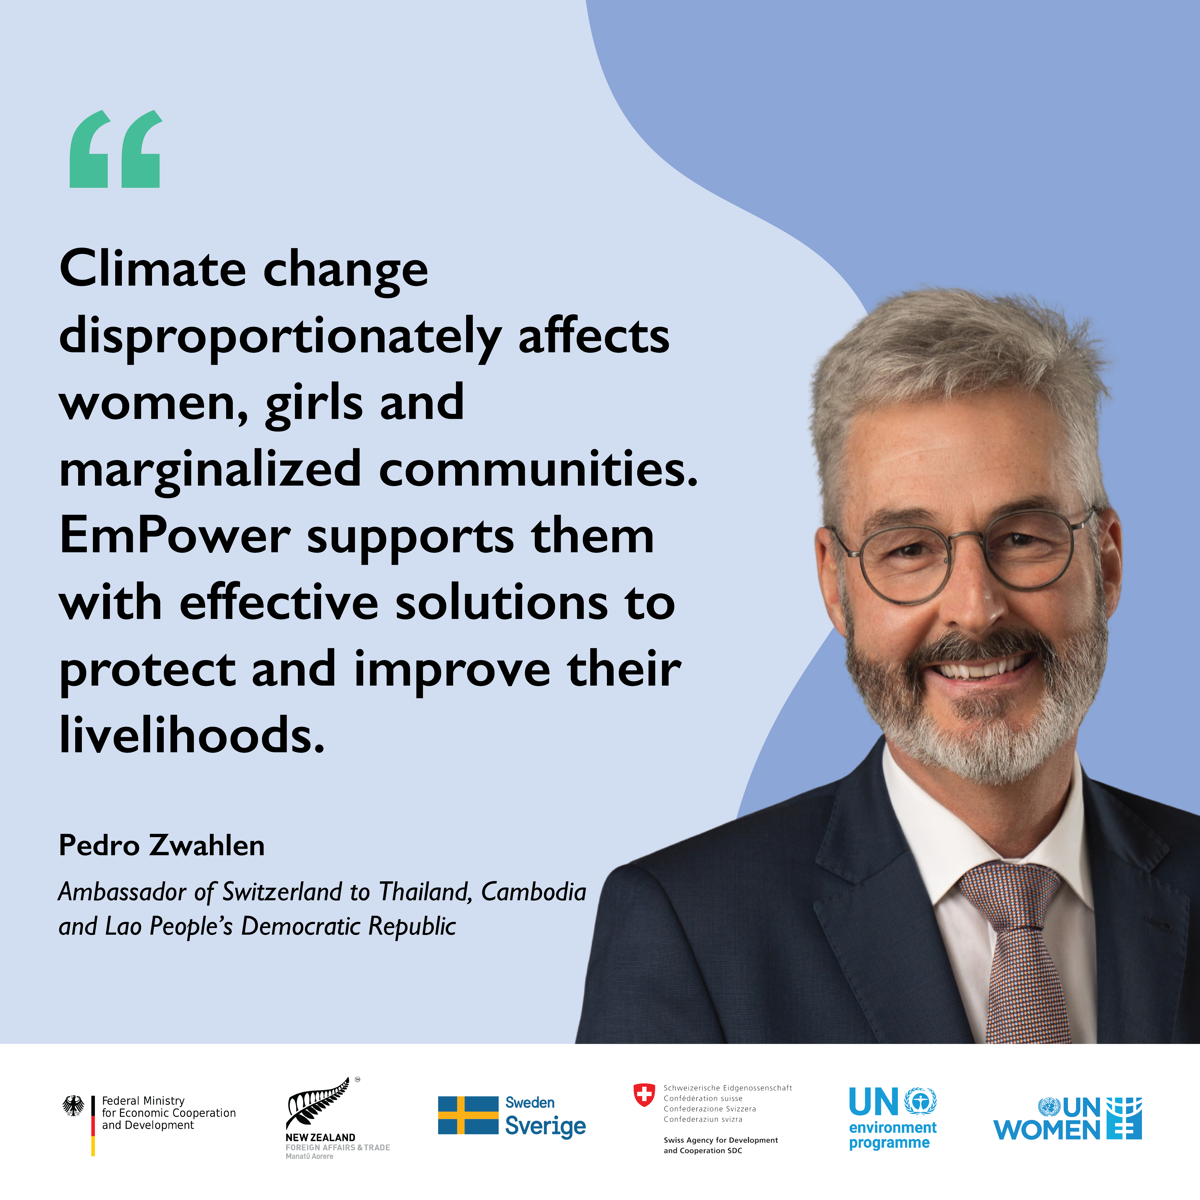 Invest in women for a climate-resilient future